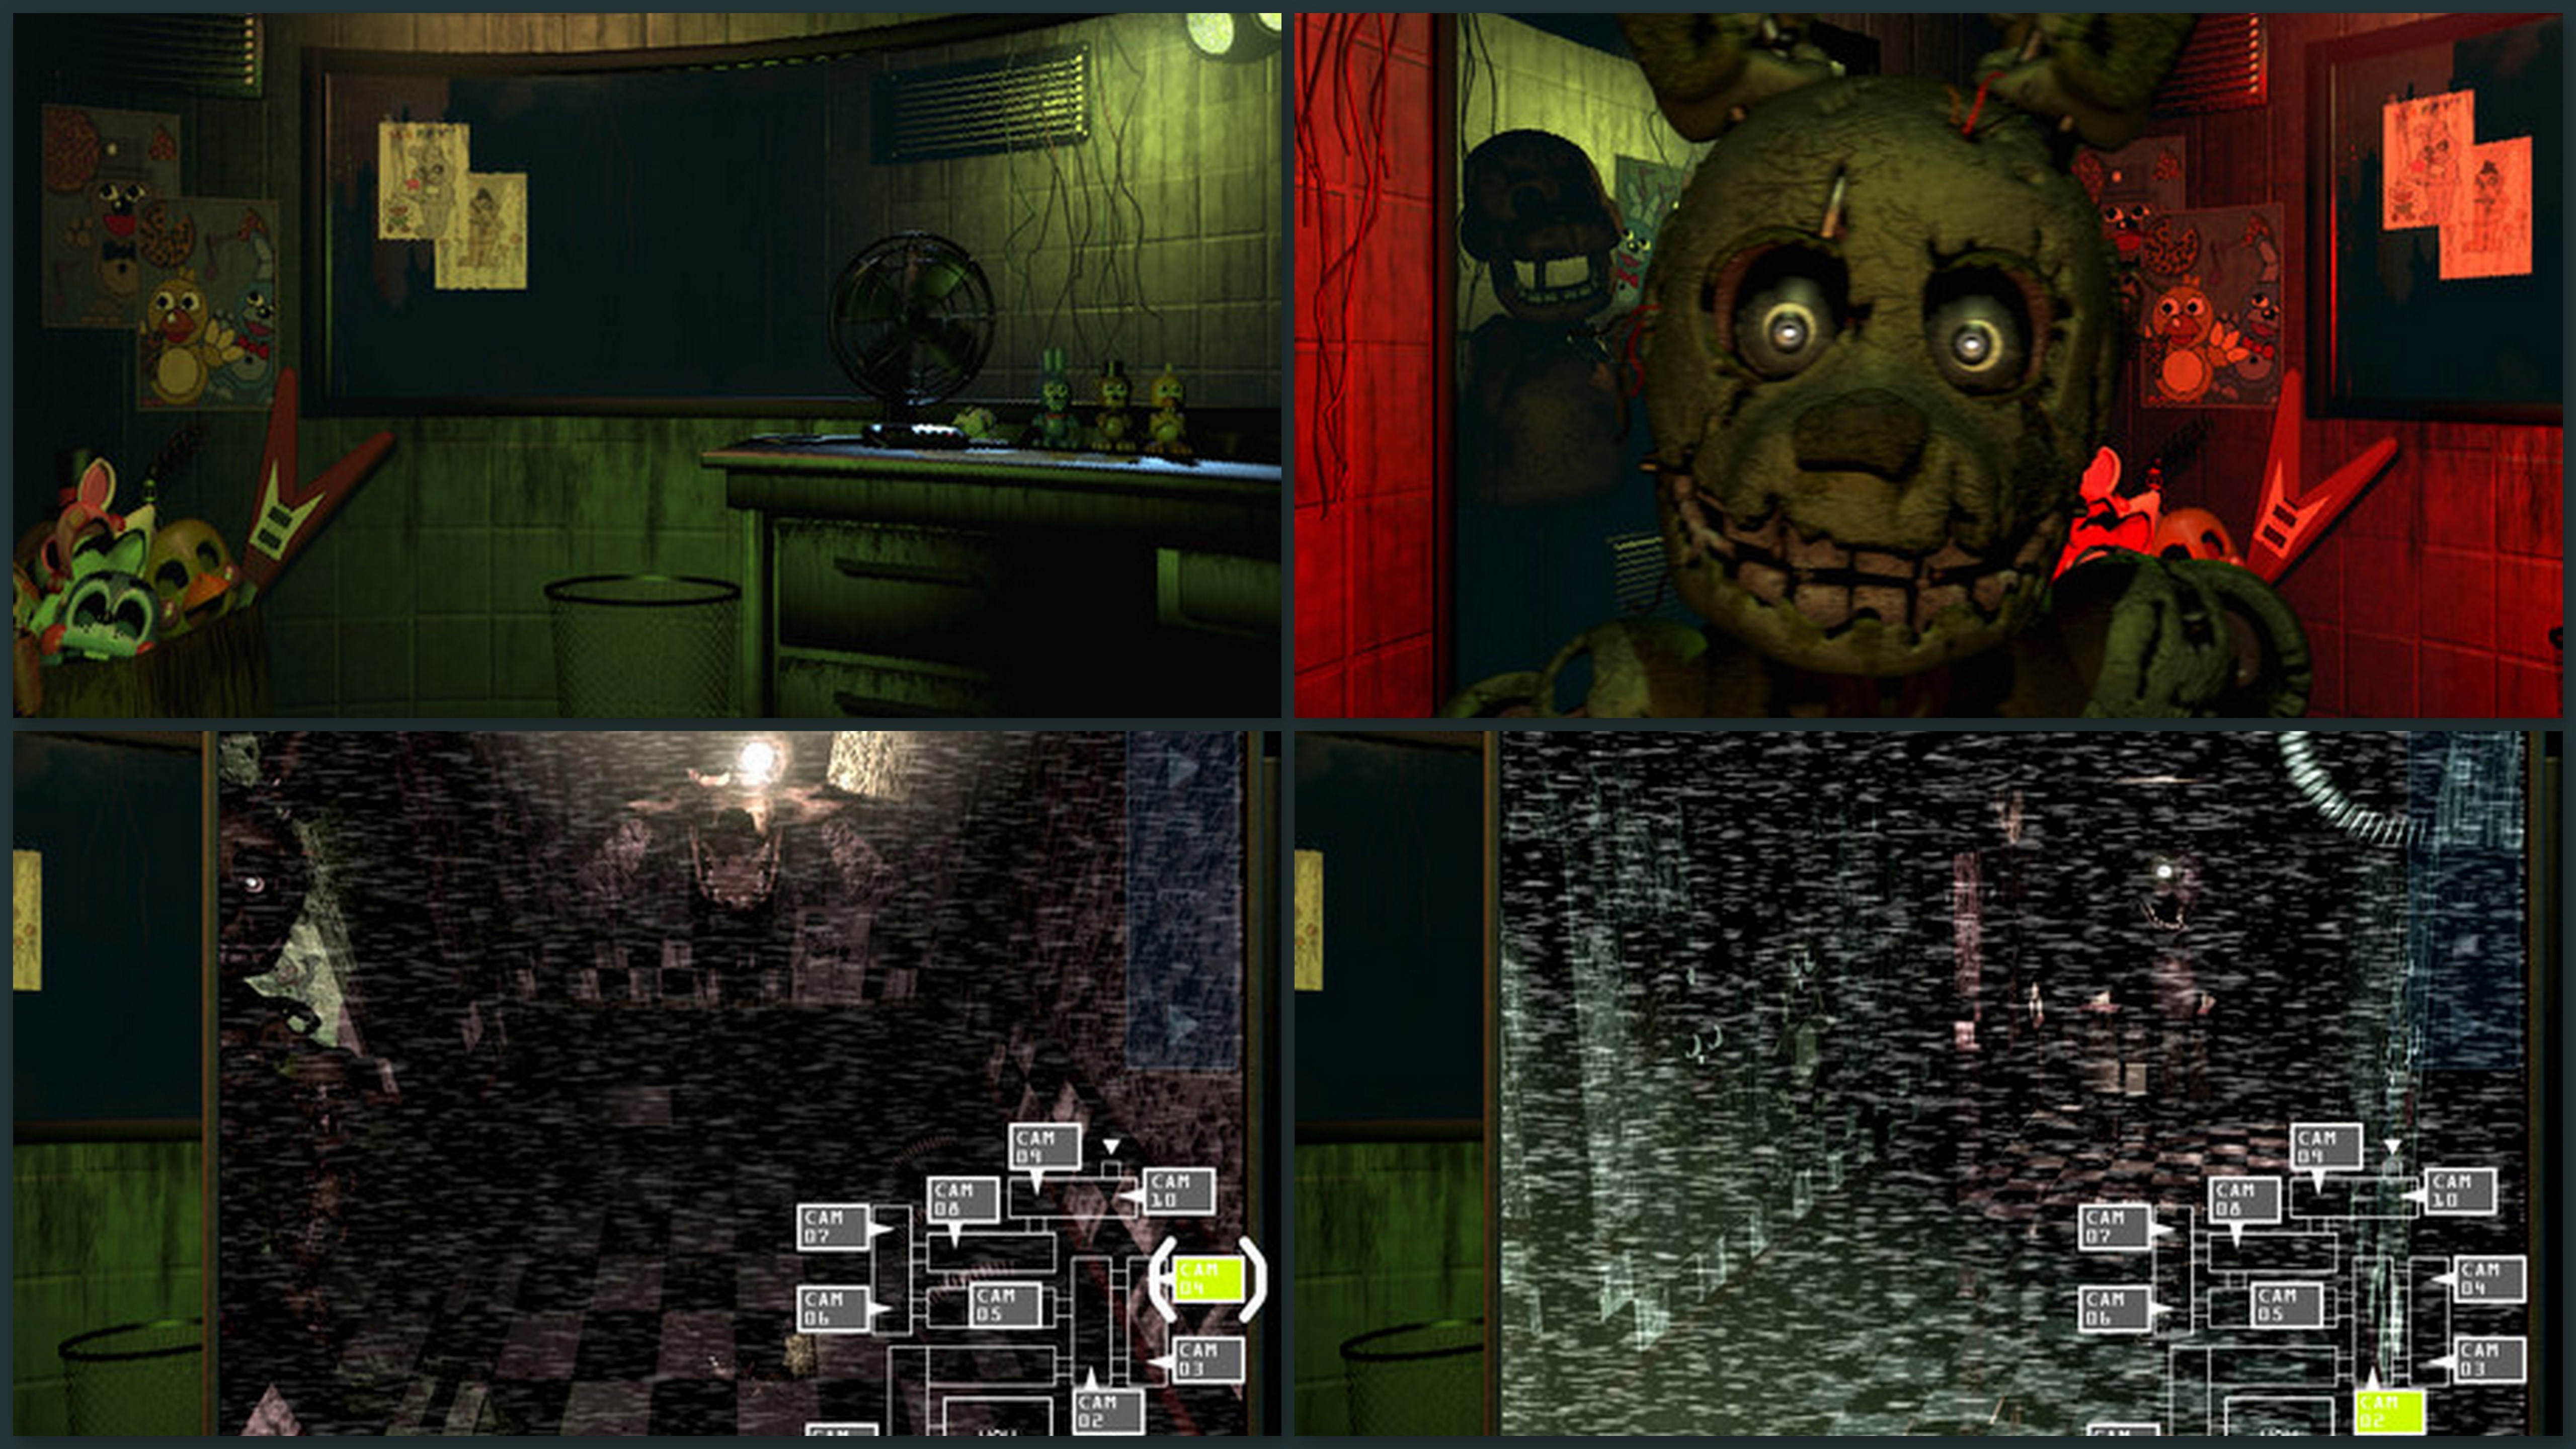 How To Install Fnaf 3 For Free